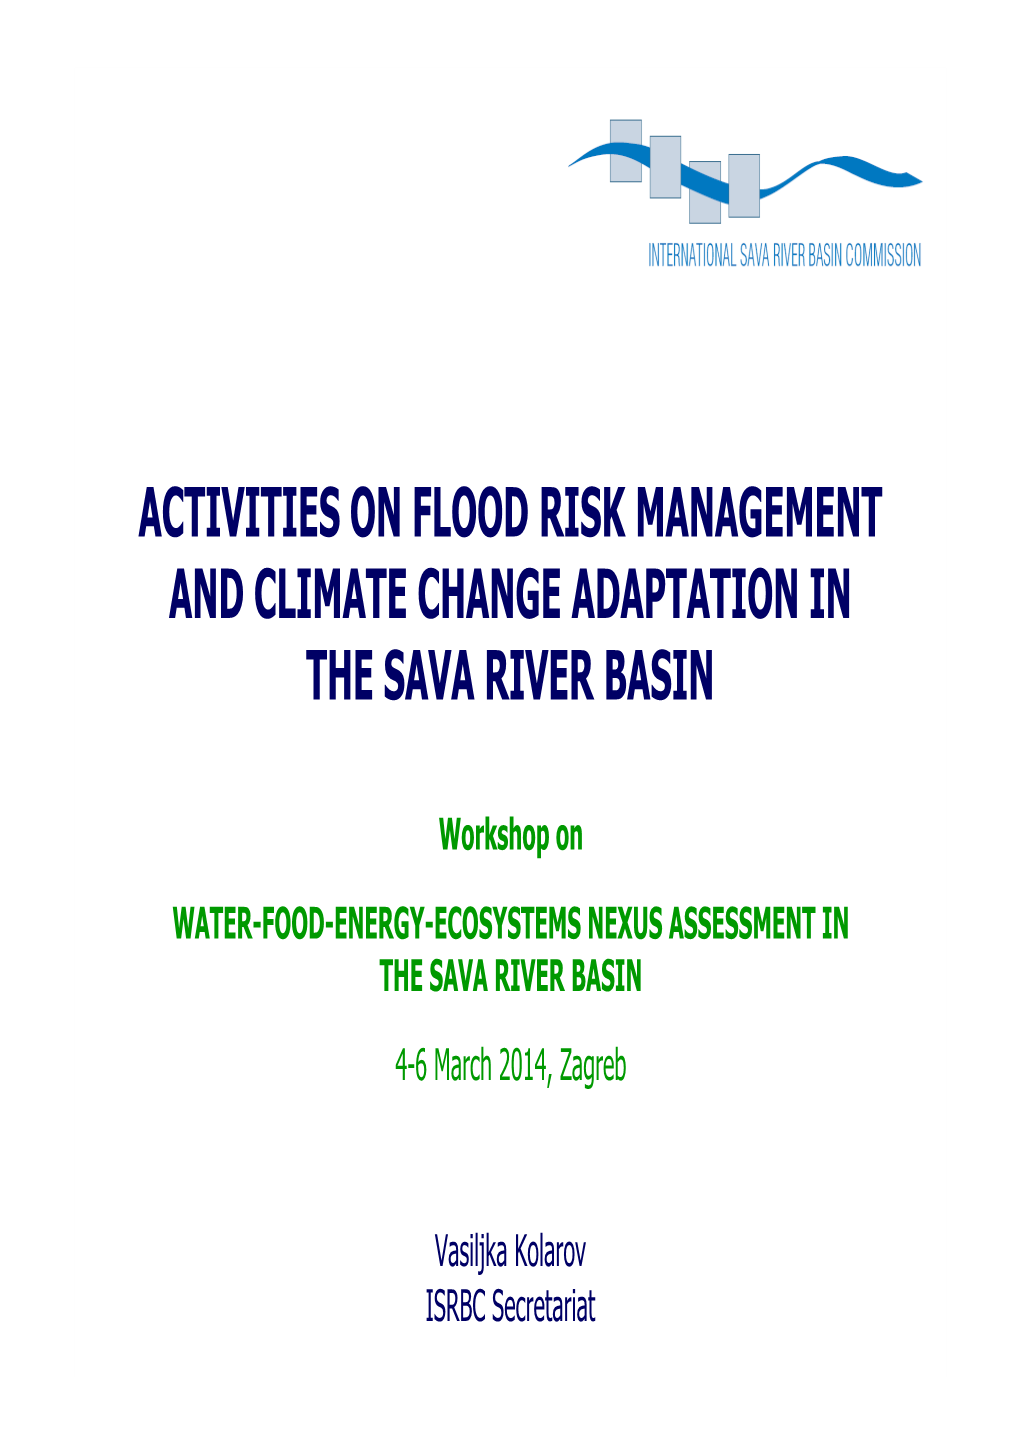 Activities on Flood Risk Management and Climate Change Adaptation in the Sava River Basin